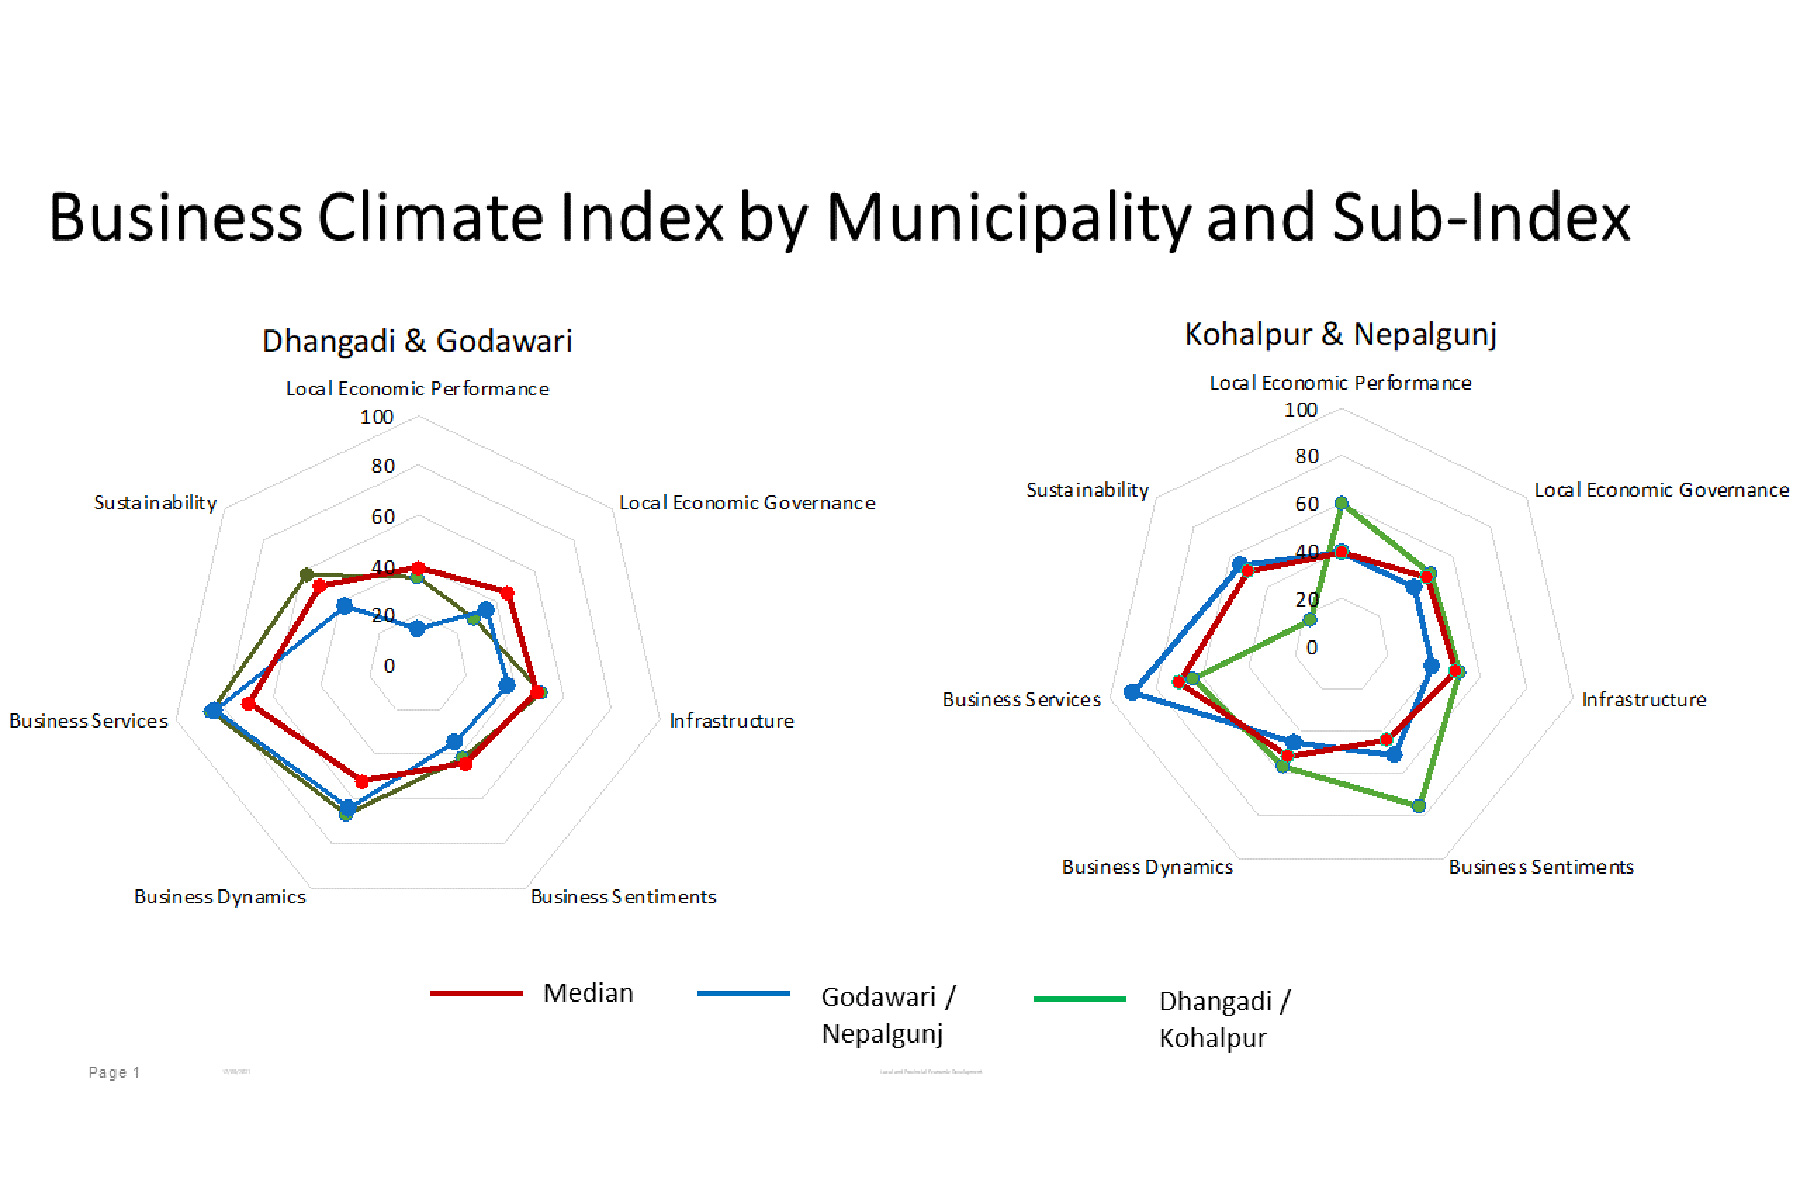 BCS tool compares municipalities on different indicators of economic development based on municipal performance and service delivery. Copyright: GIZ/LPED